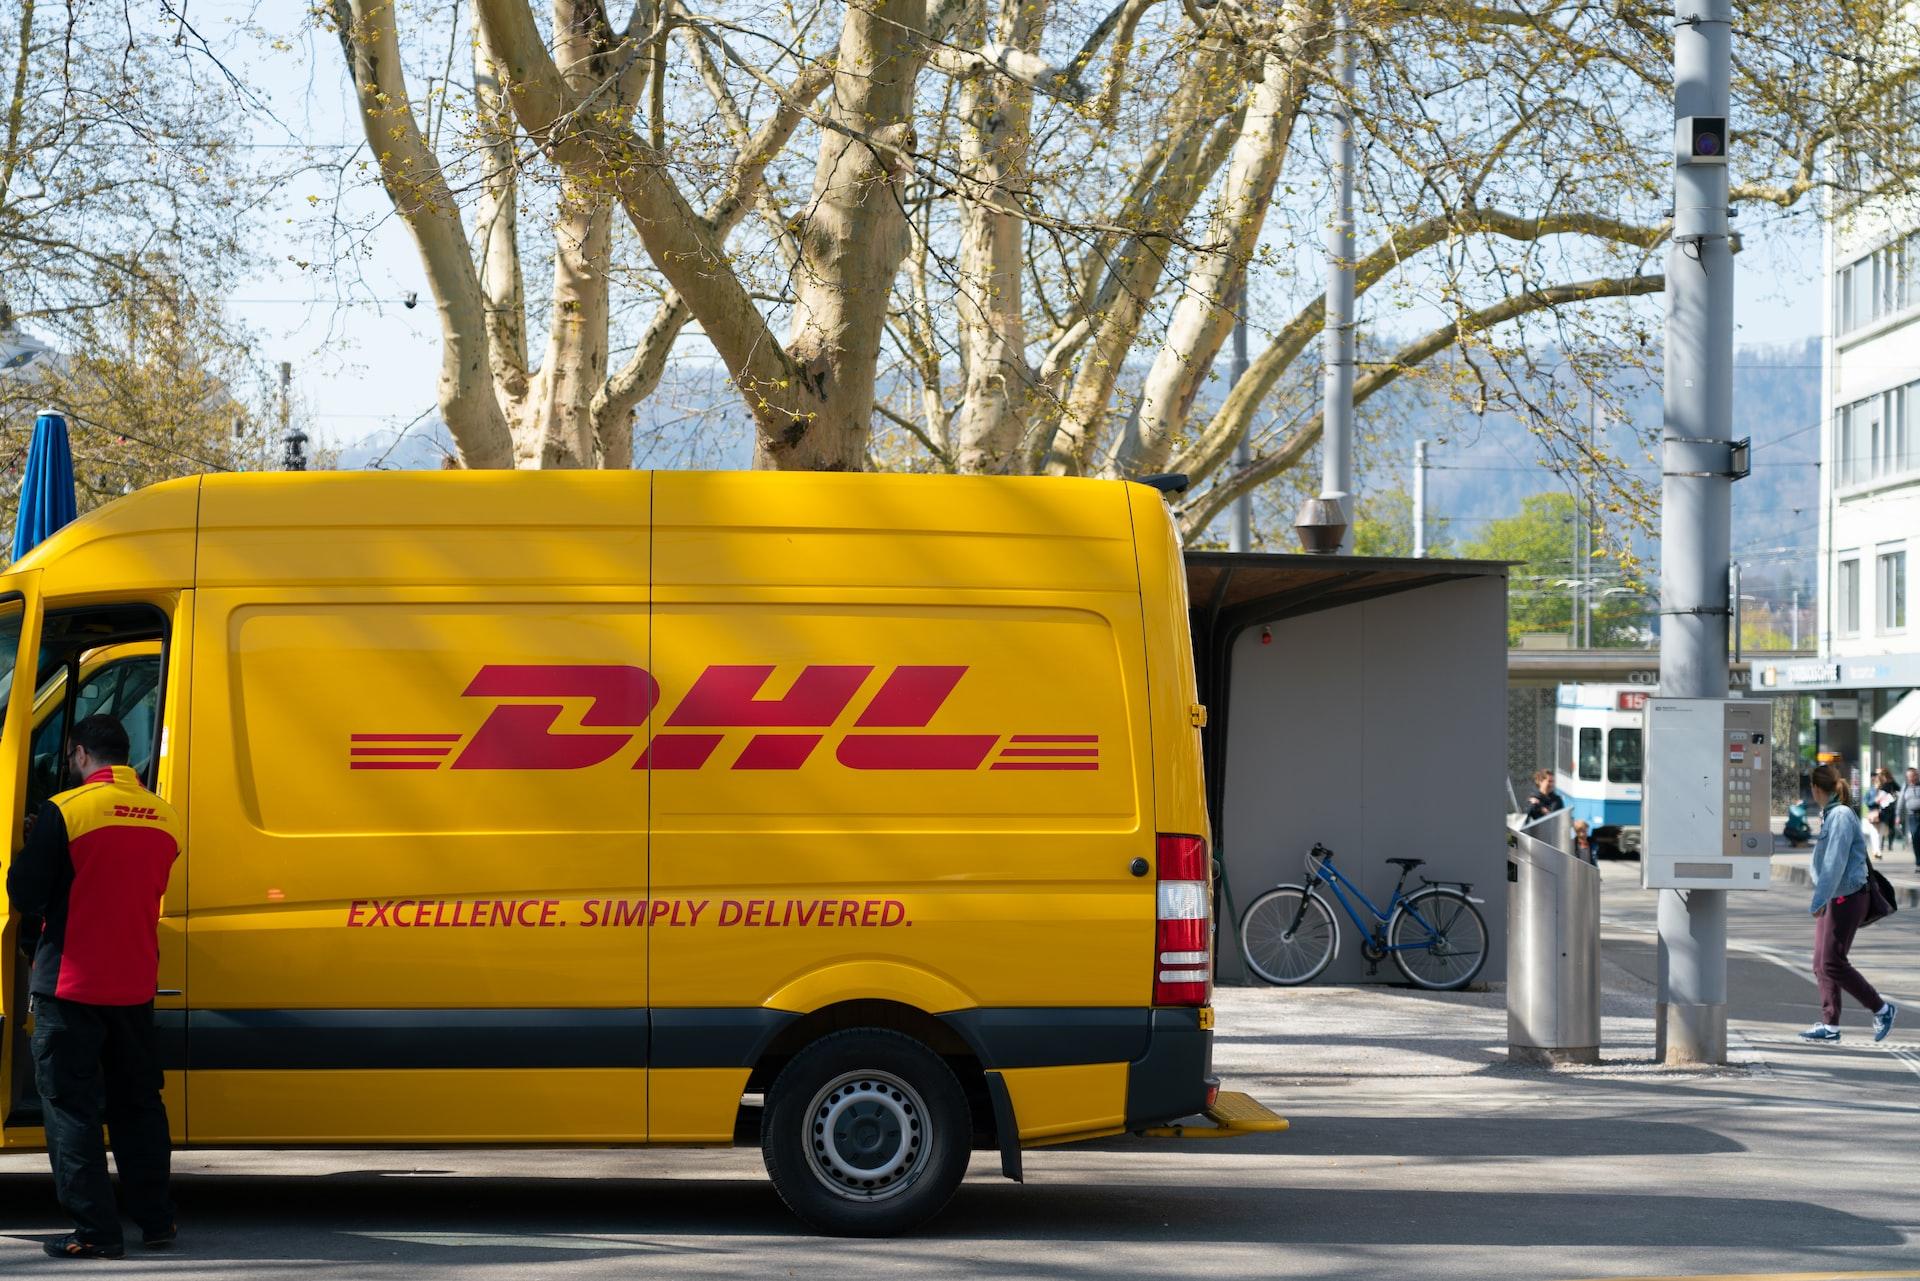 5 Reasons to Ship Your International Packages With DHL